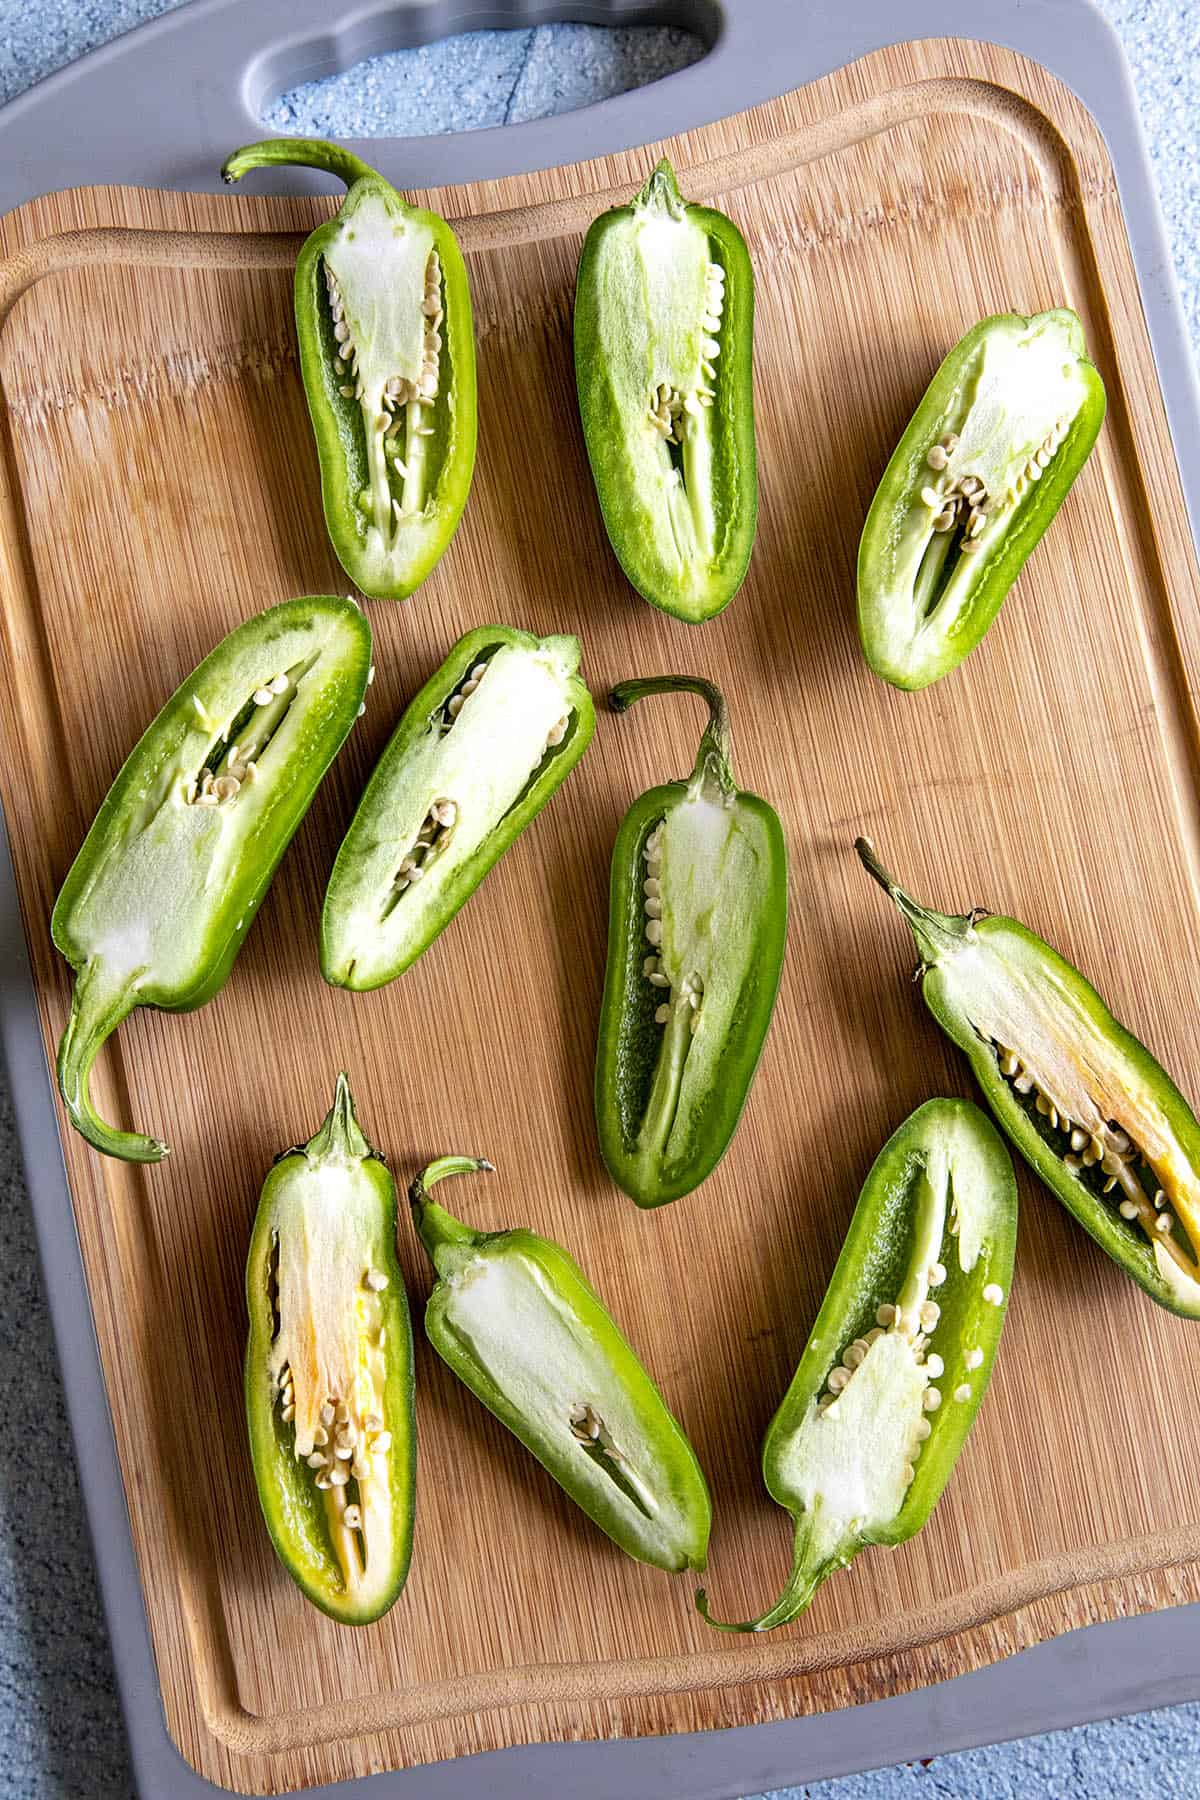 Jalapeno peppers sliced in half